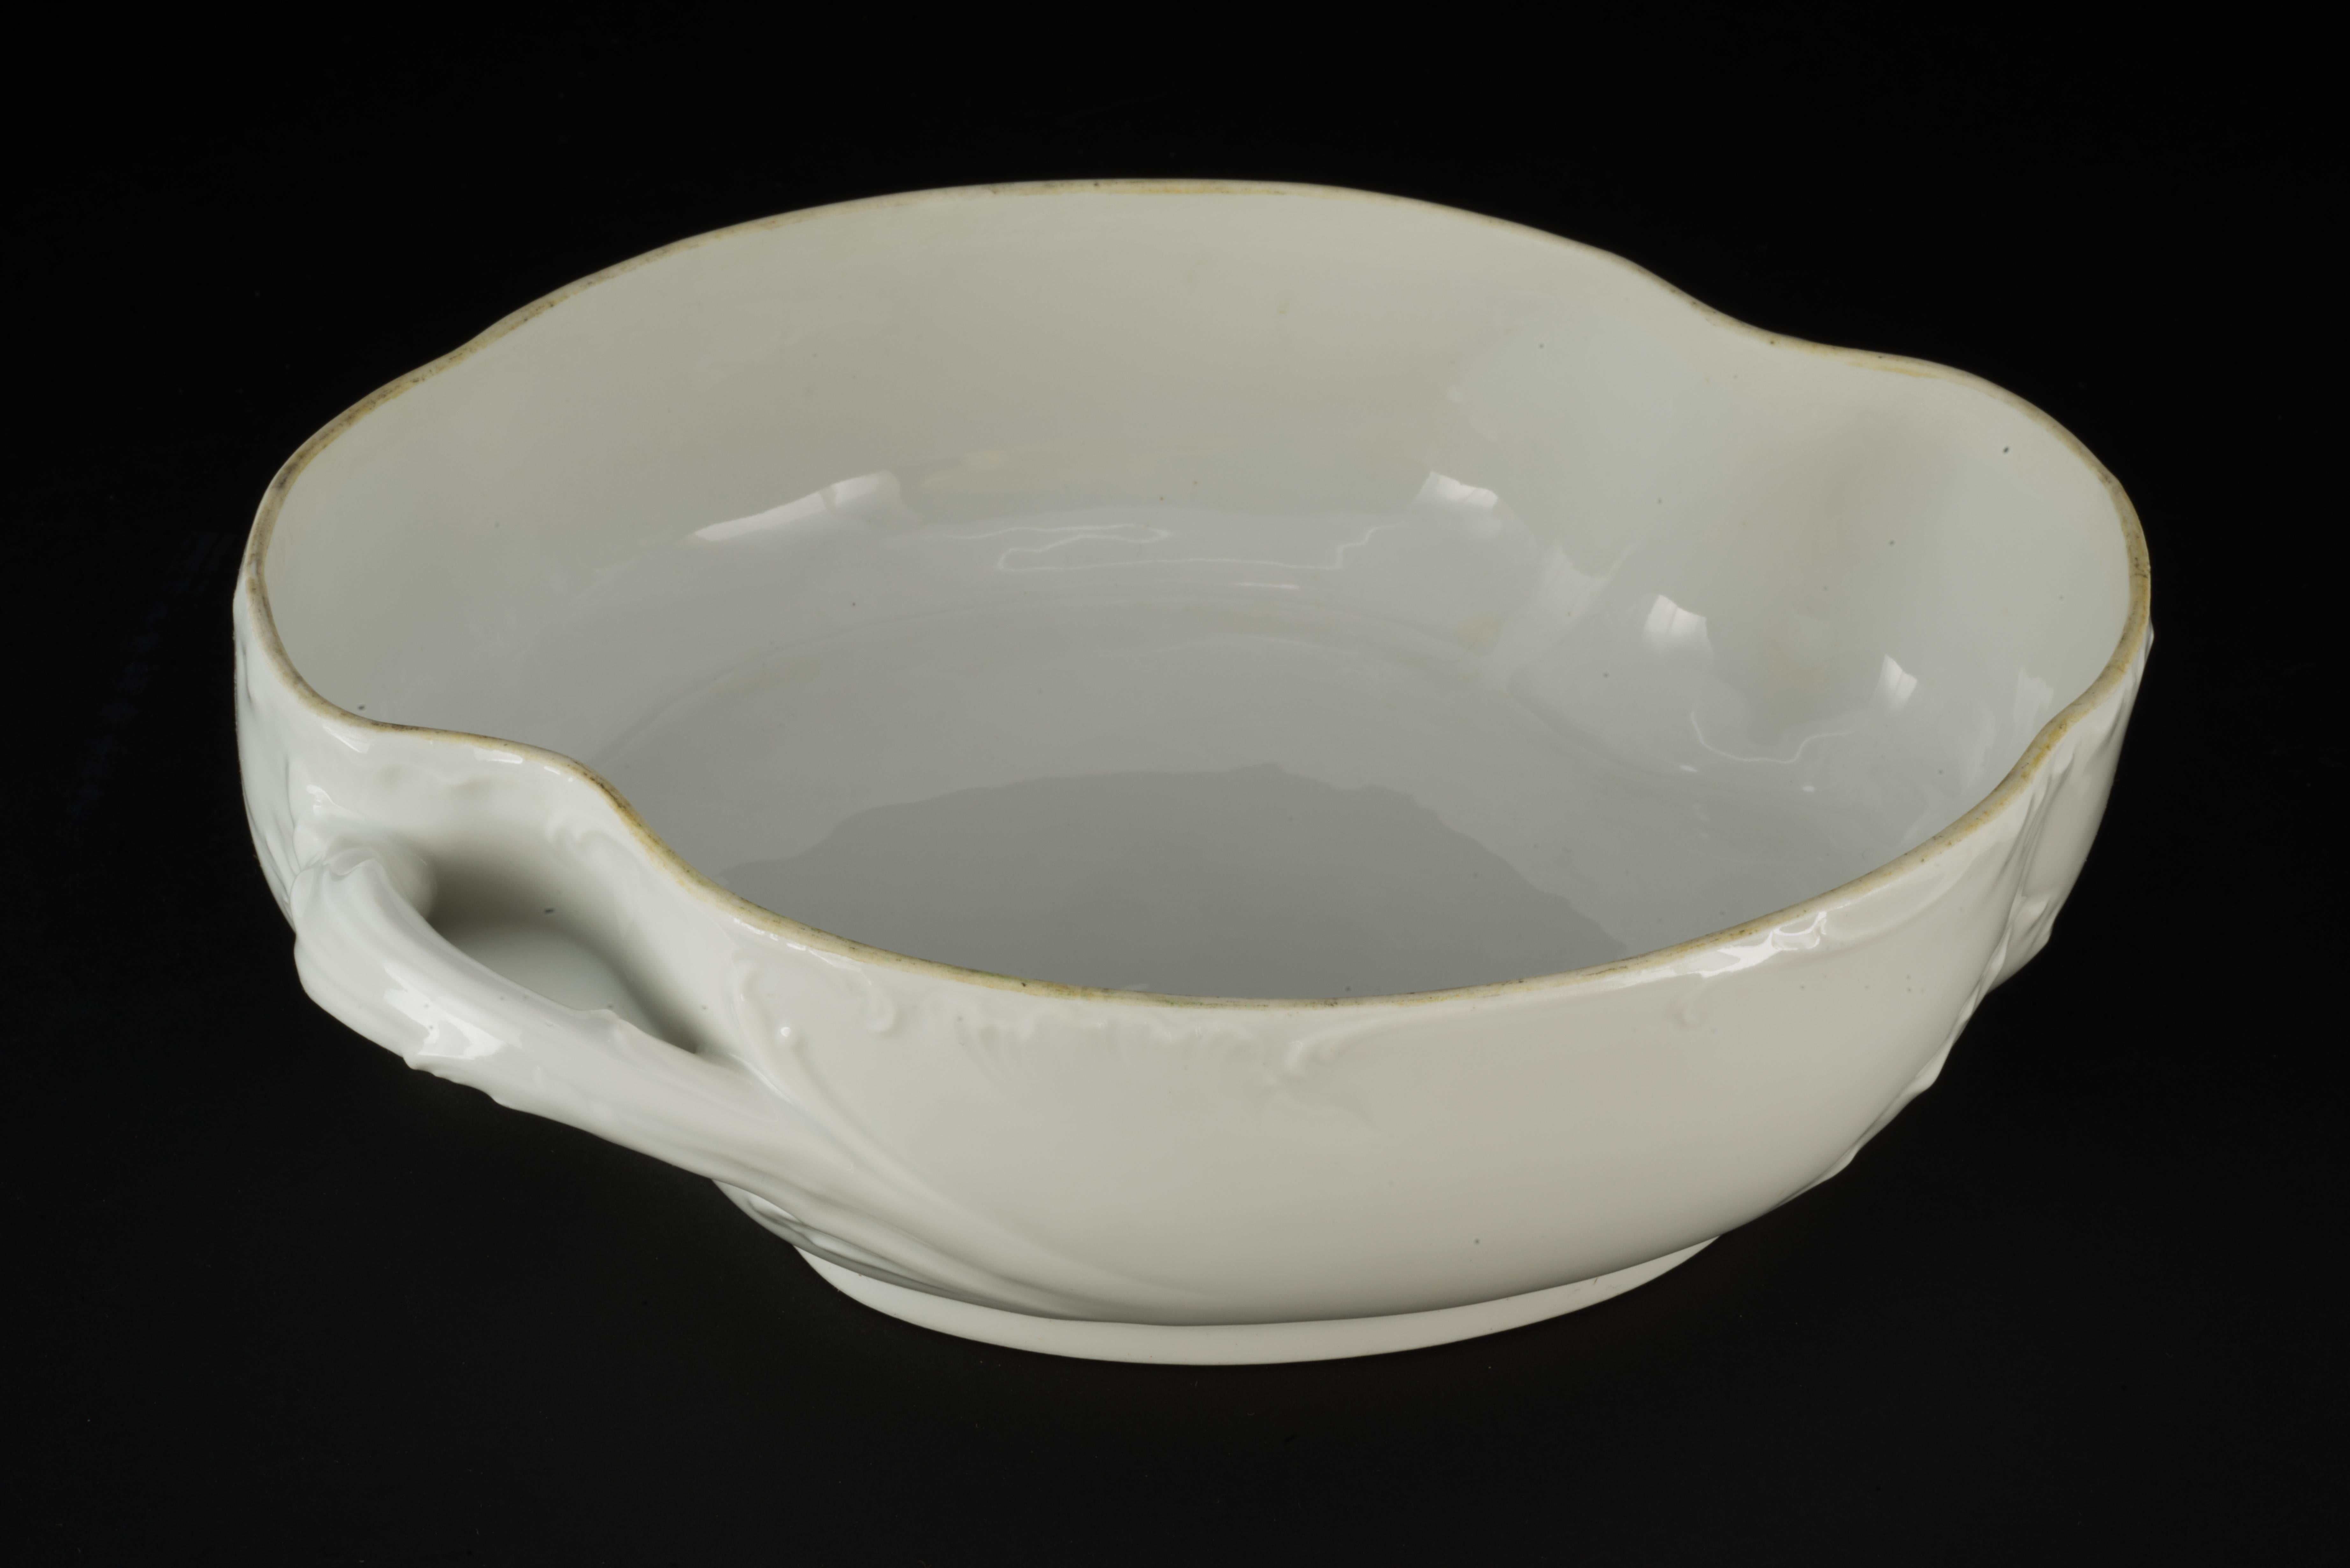 Haviland Limoges Oval Marseille Bowl with Cover, White Porcelain, 1894-1931 For Sale 3